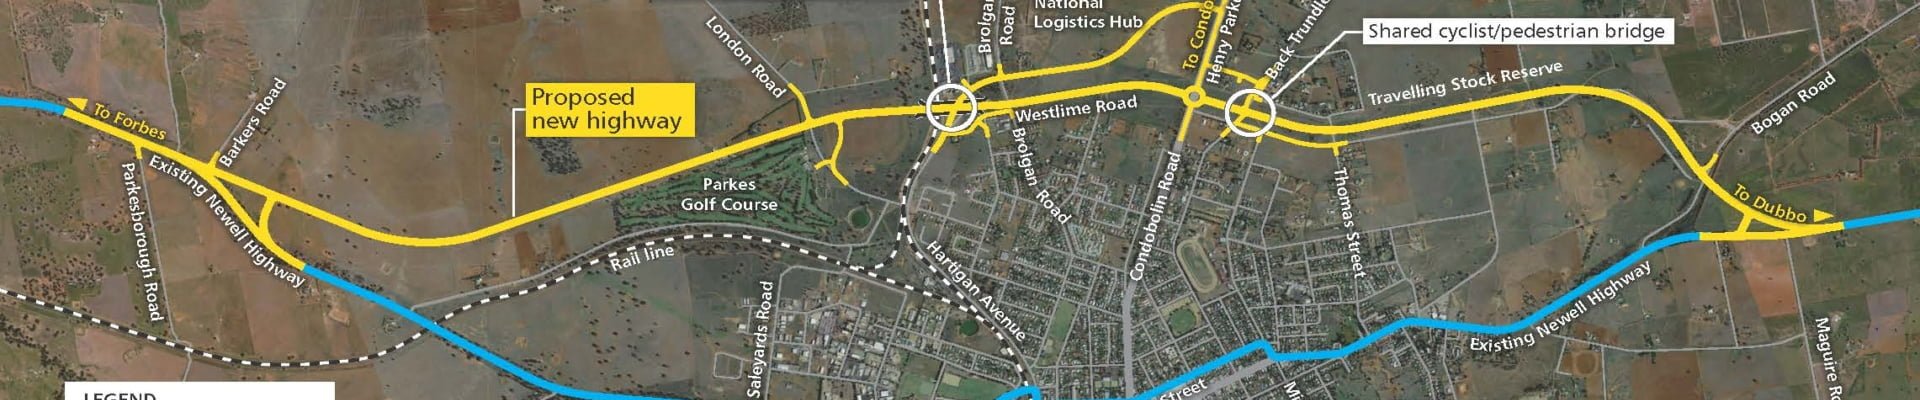 Image for PARKES BYPASS AWARDED TO GEORGIOU GROUP